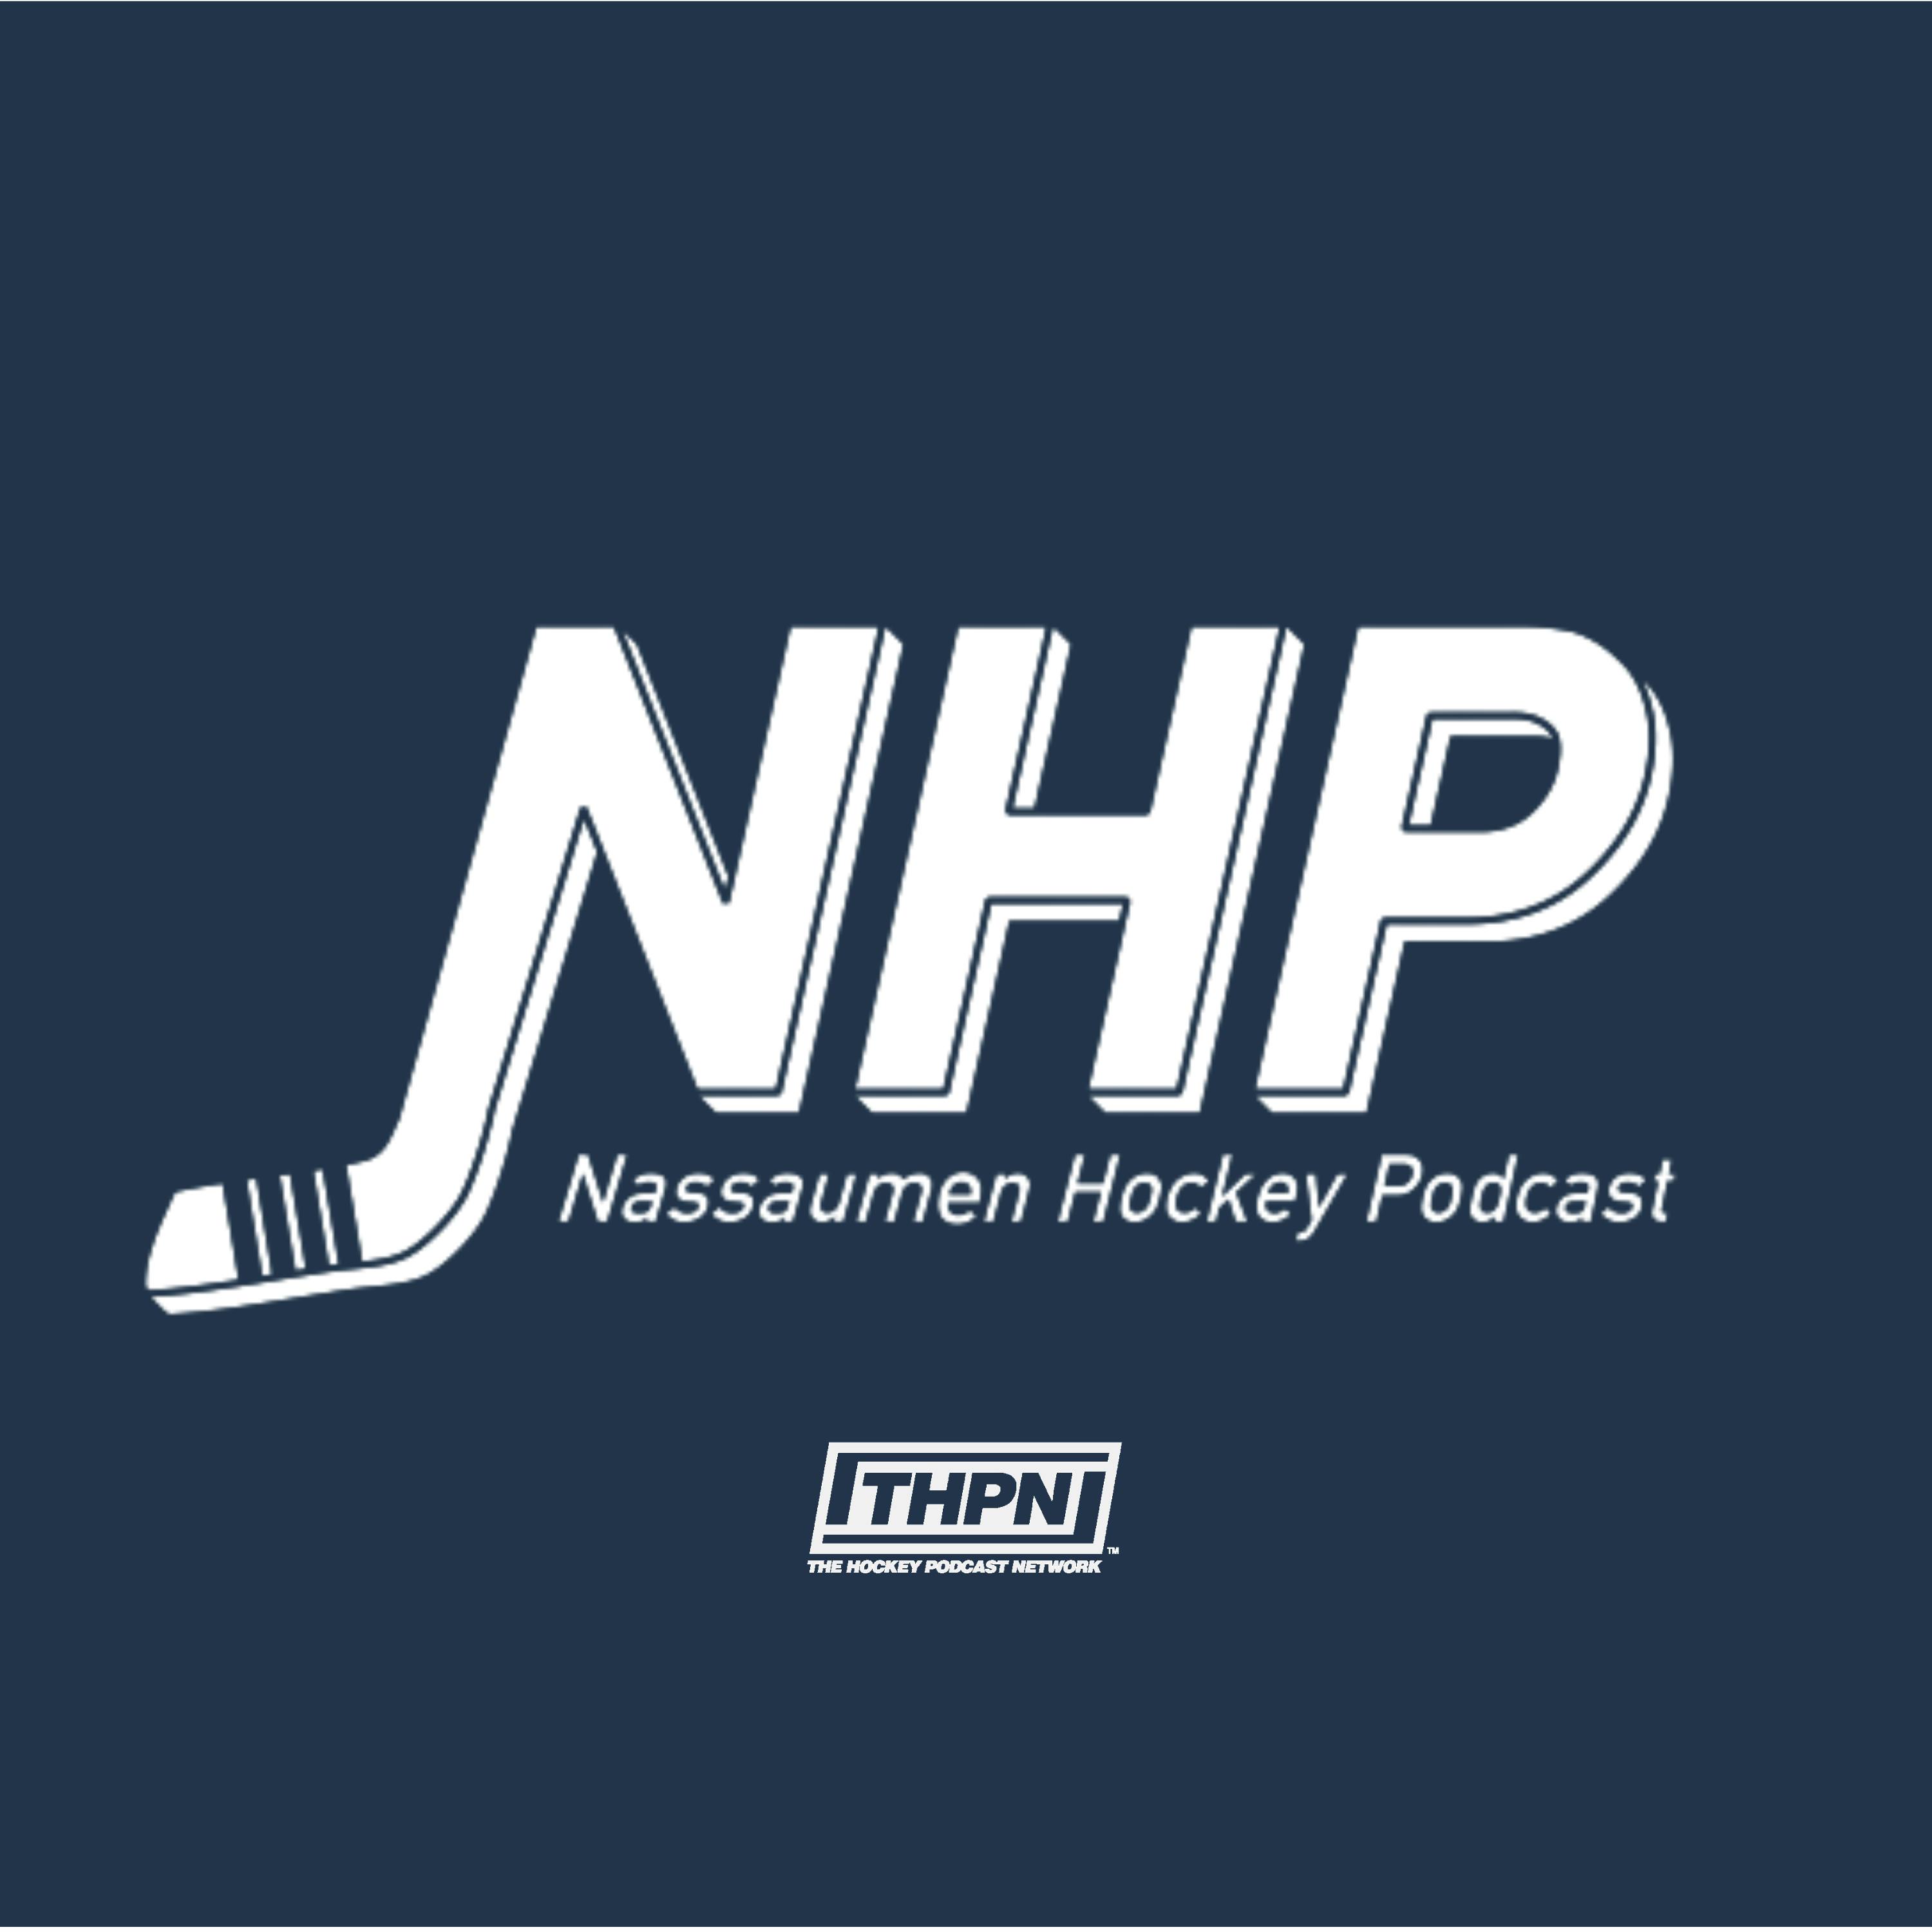 Episode 176: An Early St. Patrick's Day on Long Island - New York Islanders' Hire Patrick Roy as Head Coach